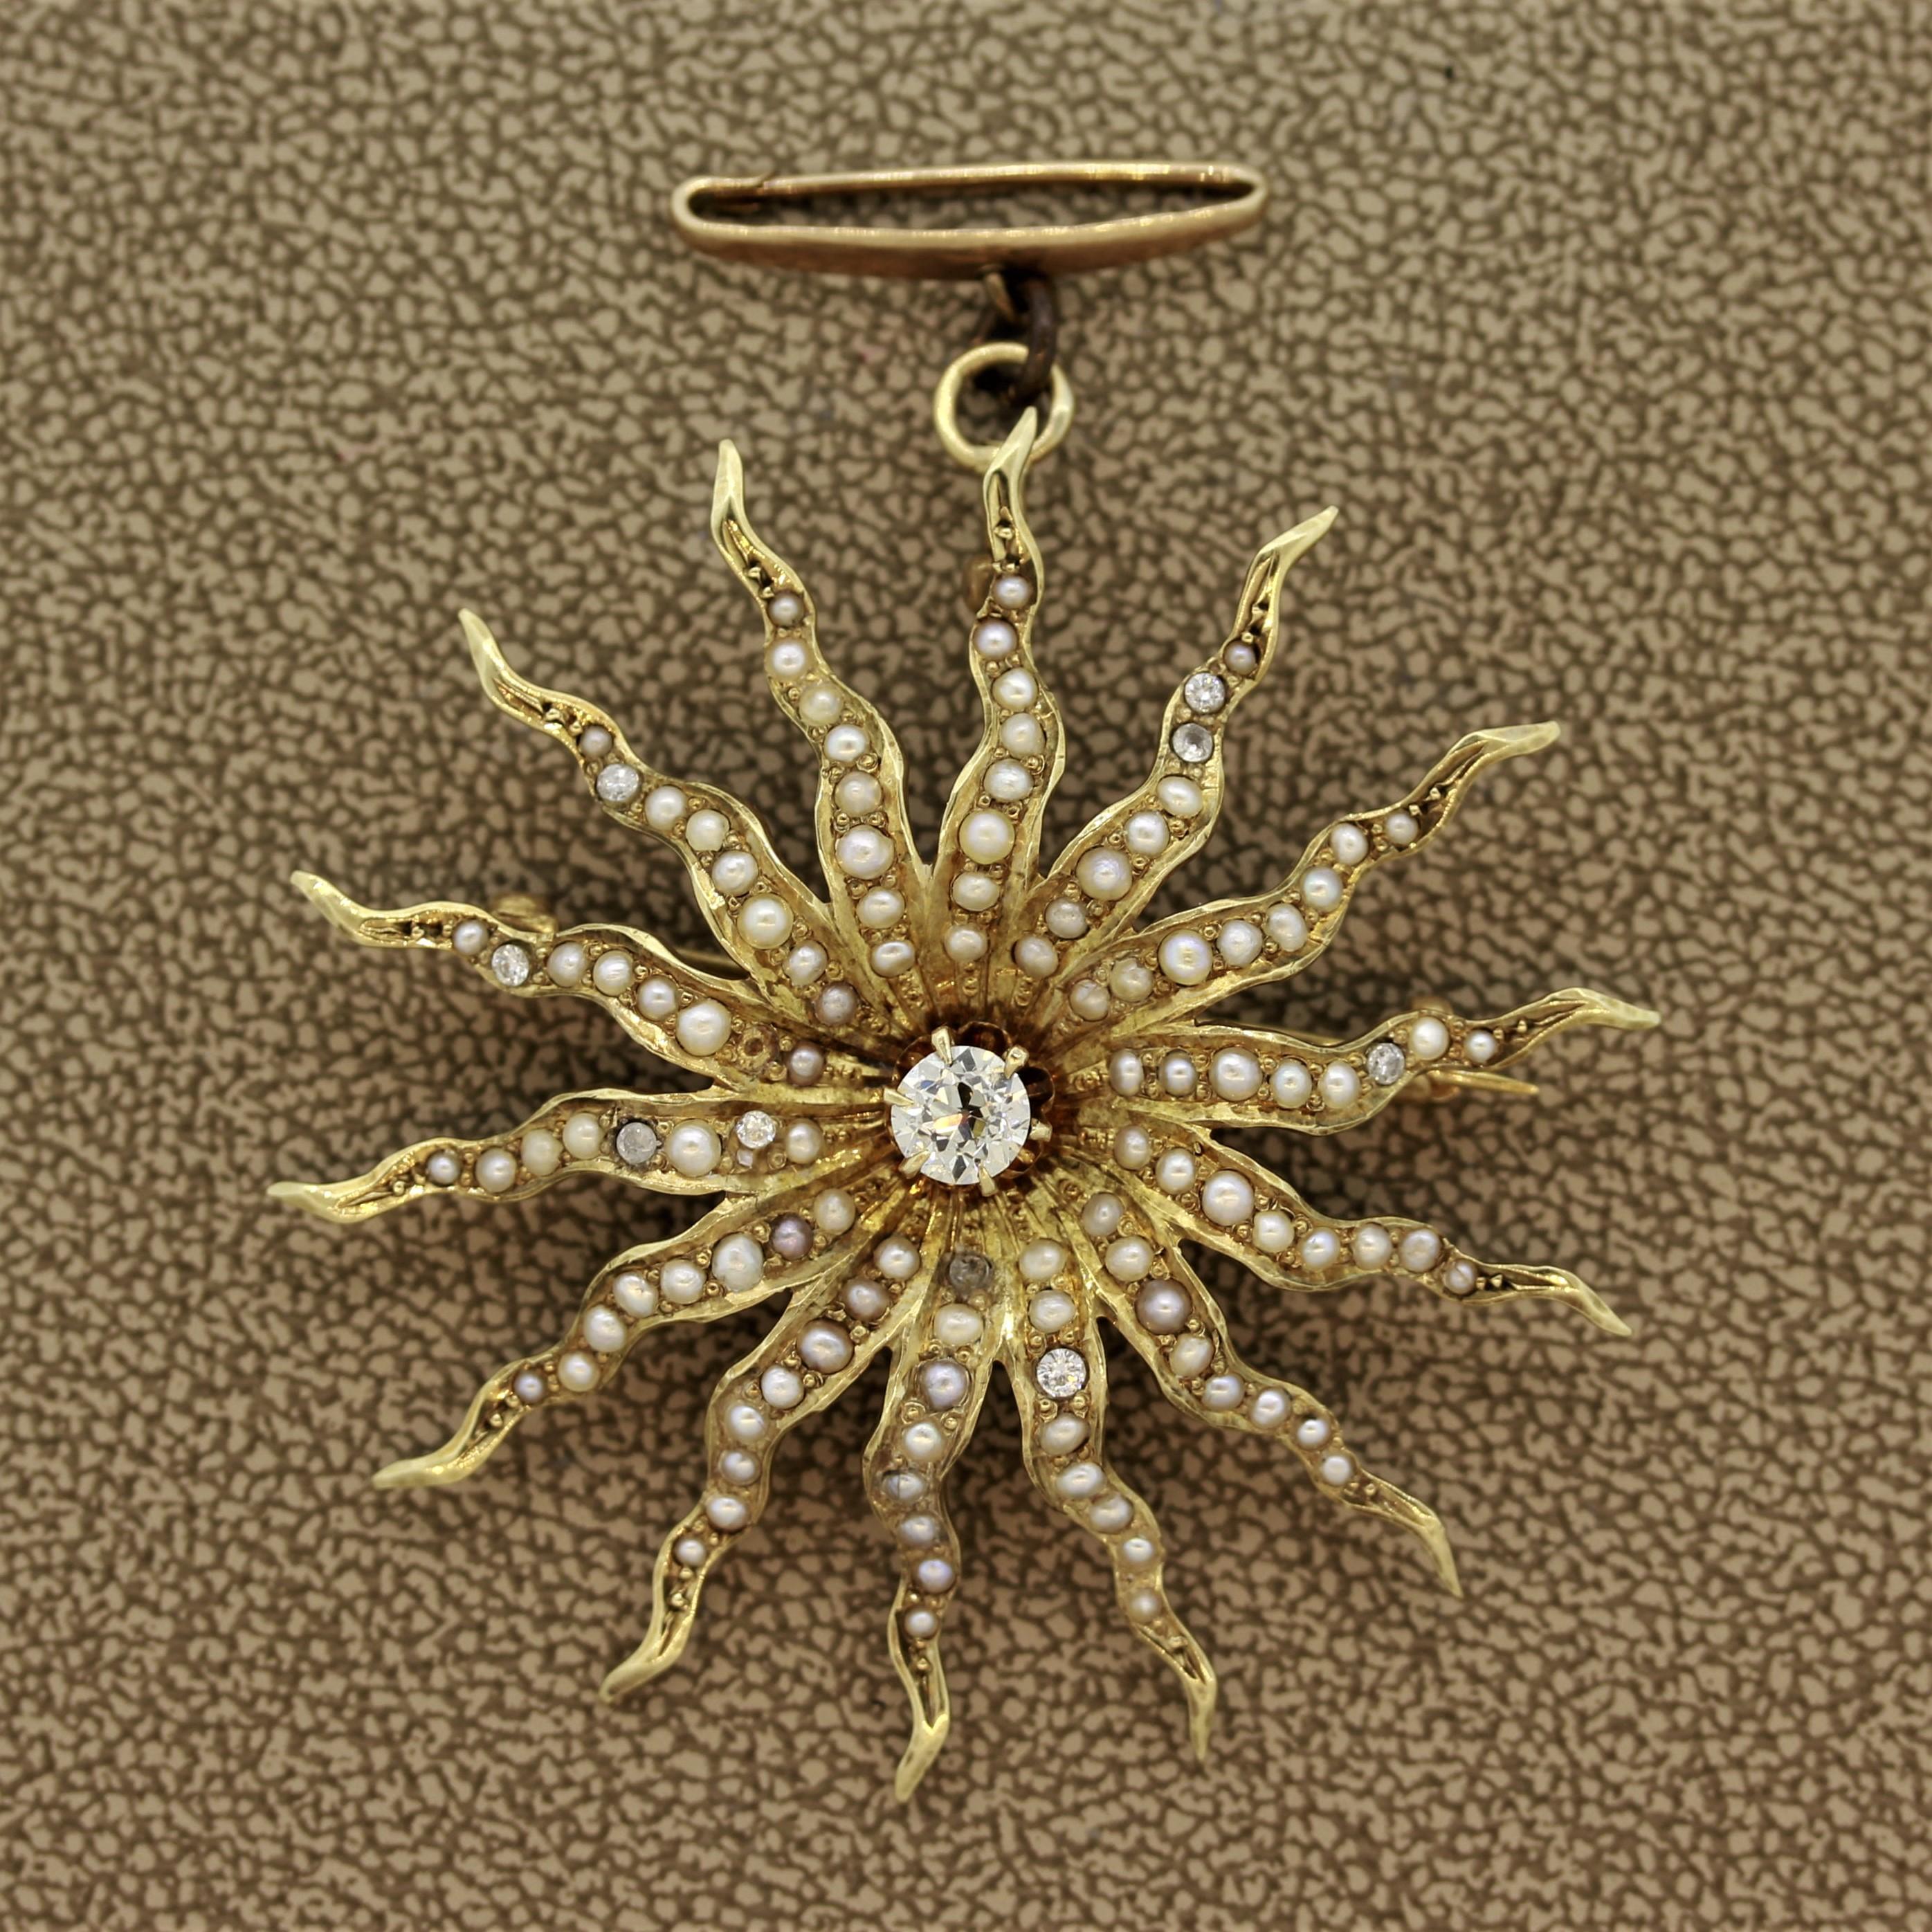 A classic sunburst motif made in the 1890’s. This antique features a large half carat old mine cut diamond in the center of the piece. The rays of the sun are set with natural seed pearls and smaller diamonds. Made in 14k gold and can be worn as a